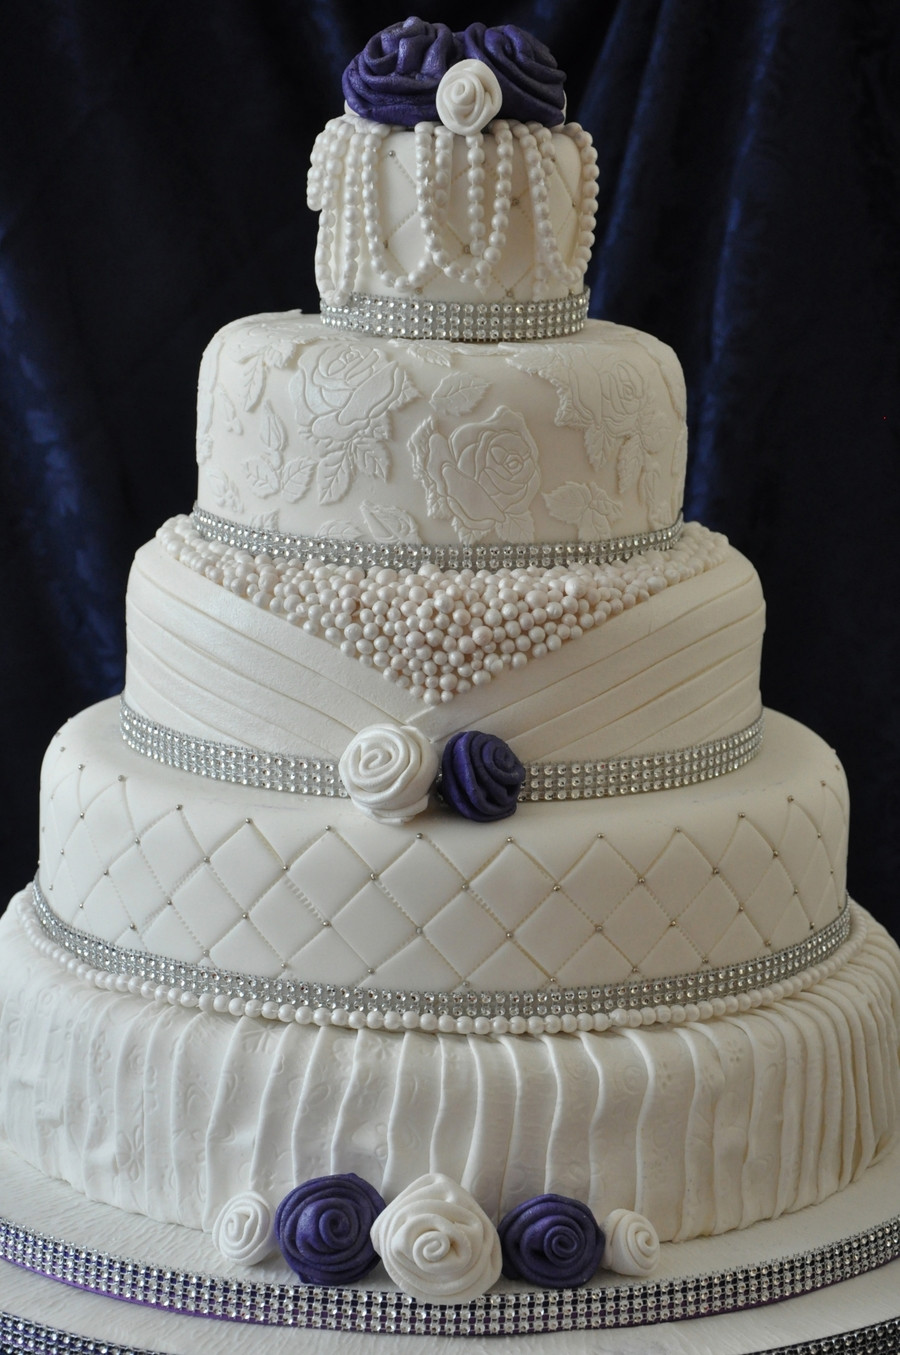 5 Tiered Wedding Cakes
 5 Tier Cake With Lace Effects Ribbon Roses And Pearls